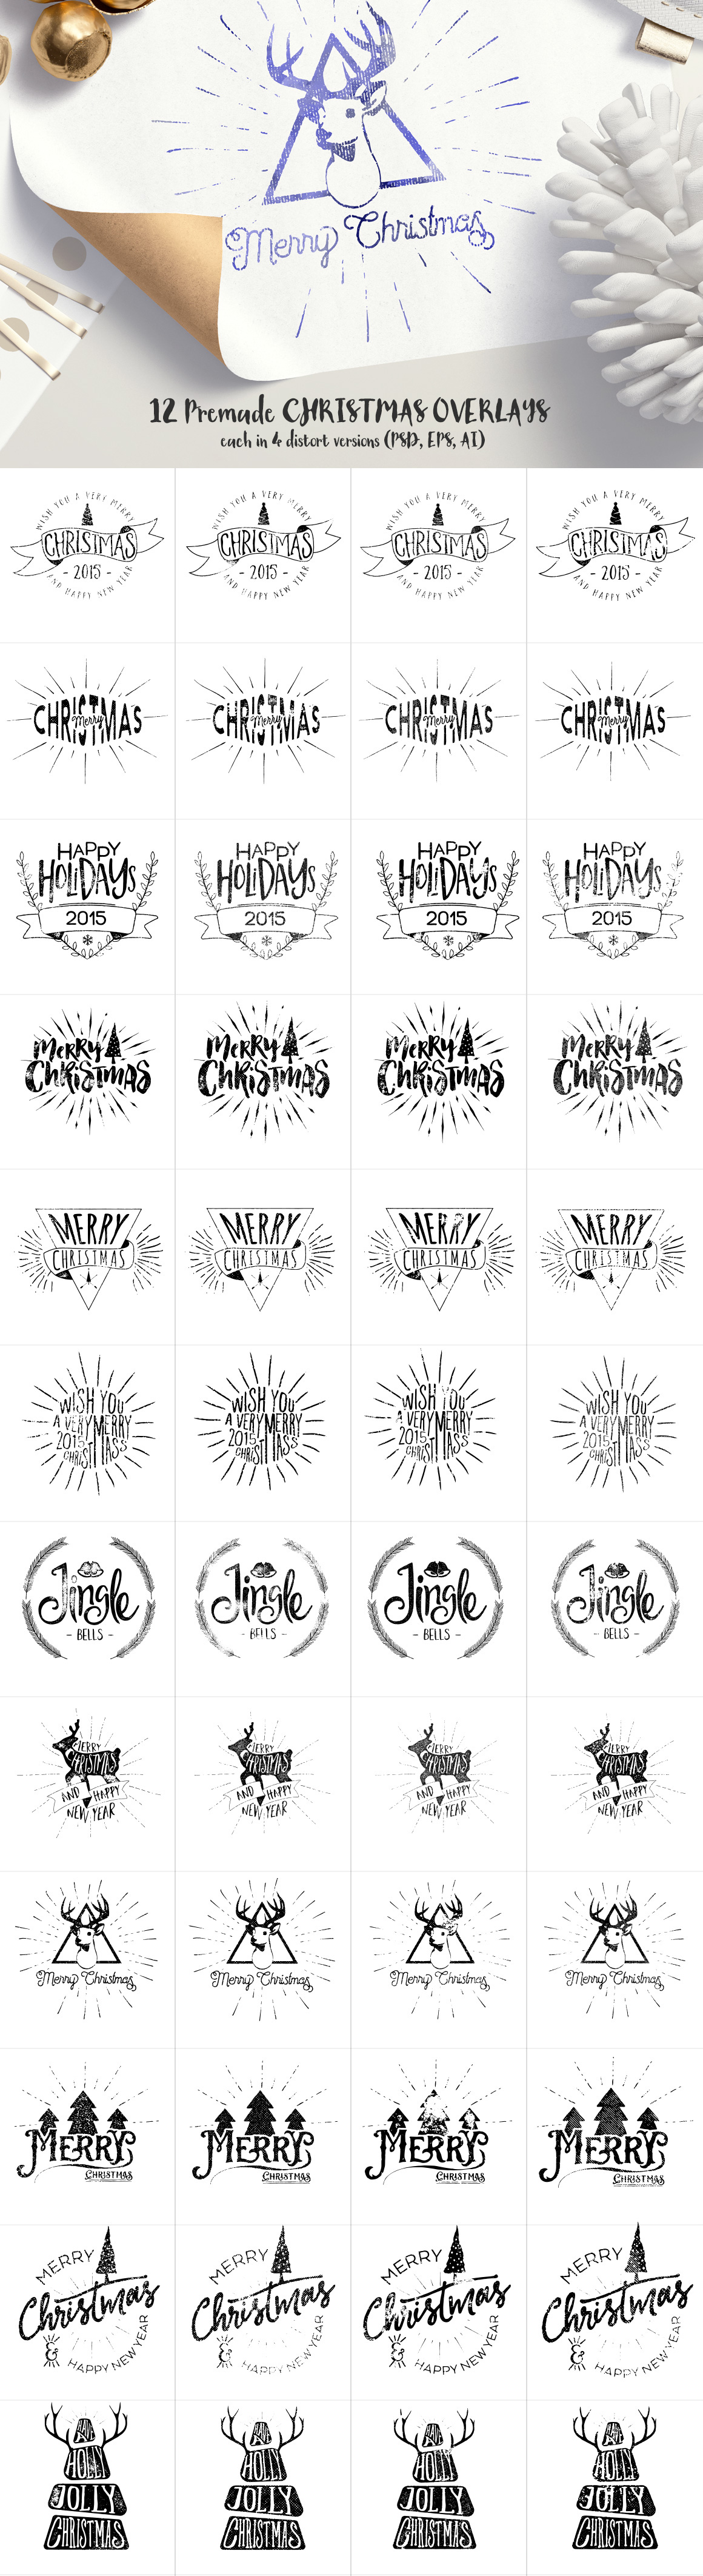 Christmas vector snow gold holidays illustrations brushes winter watercolor silver overlays